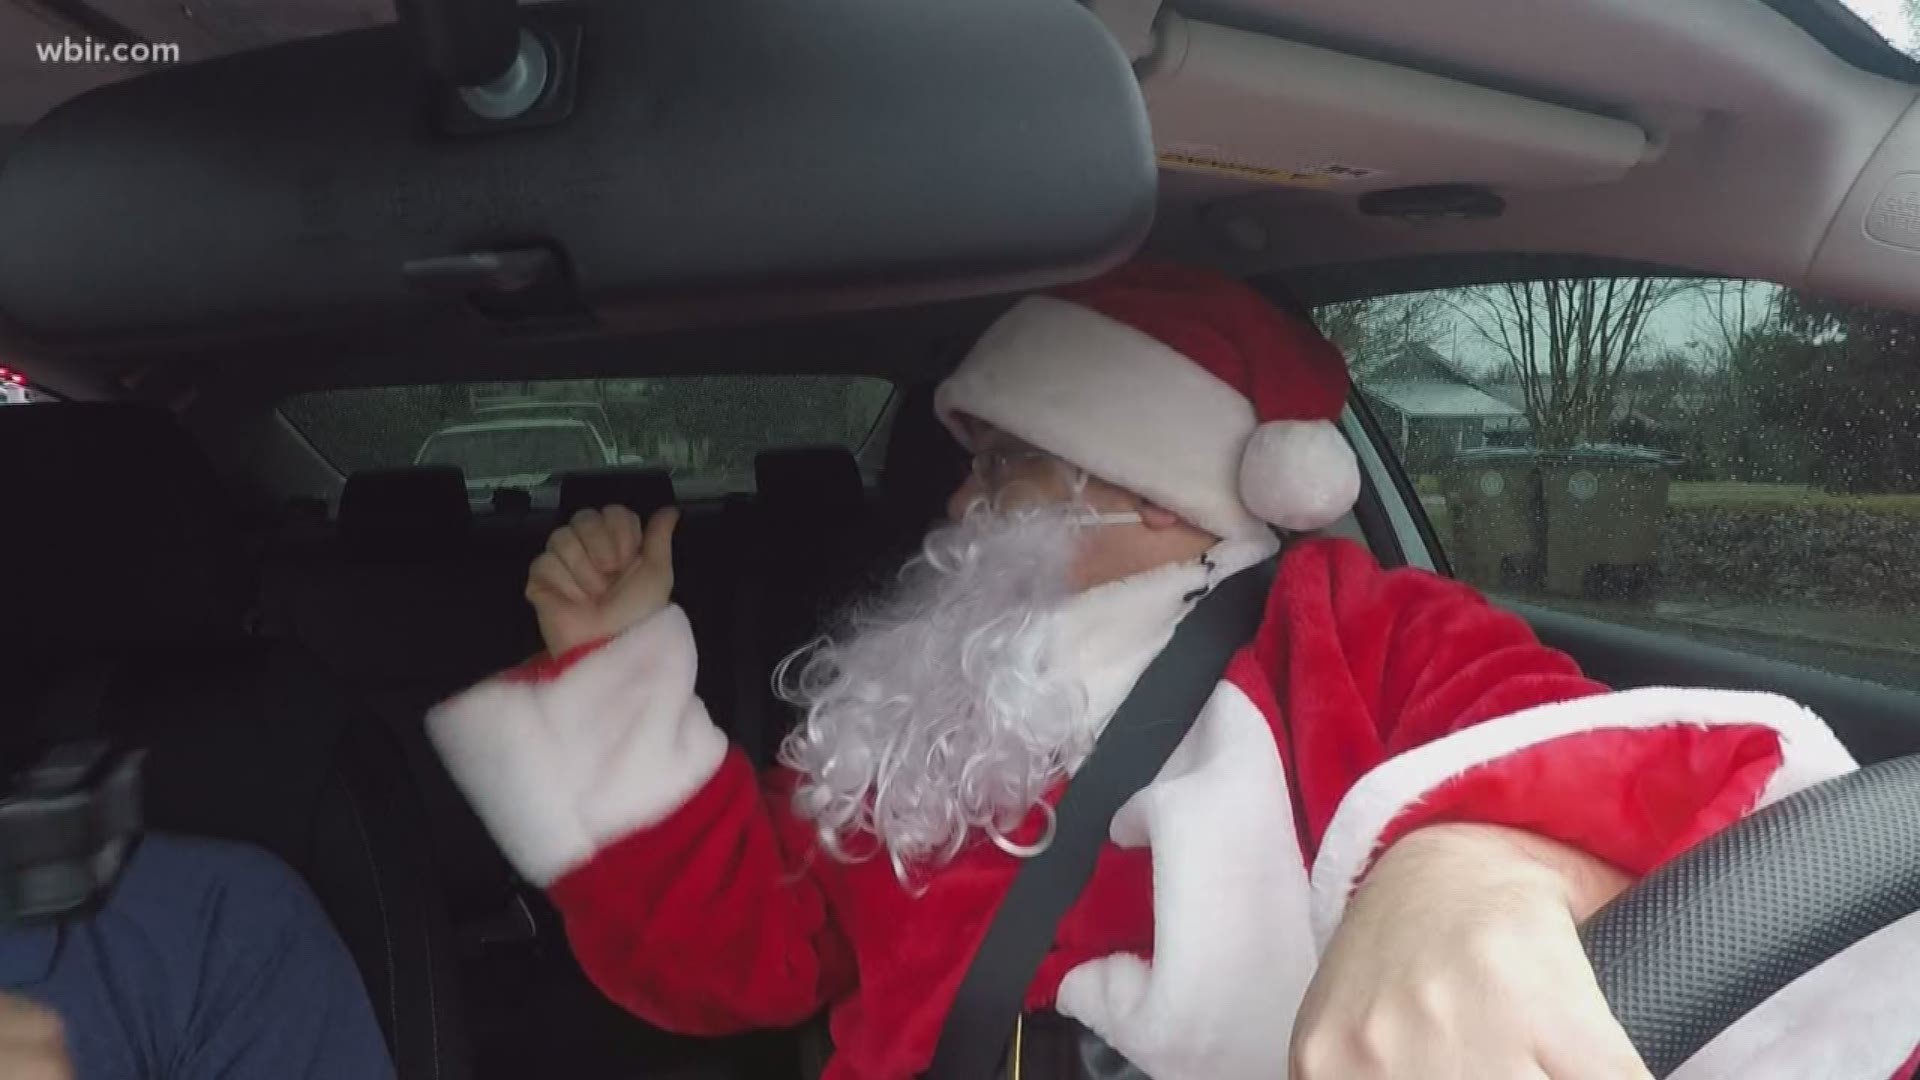 It's Knoxville's Uber Santa. Daniel Sechtin went for a ride in his holly jolly Honda Civic.